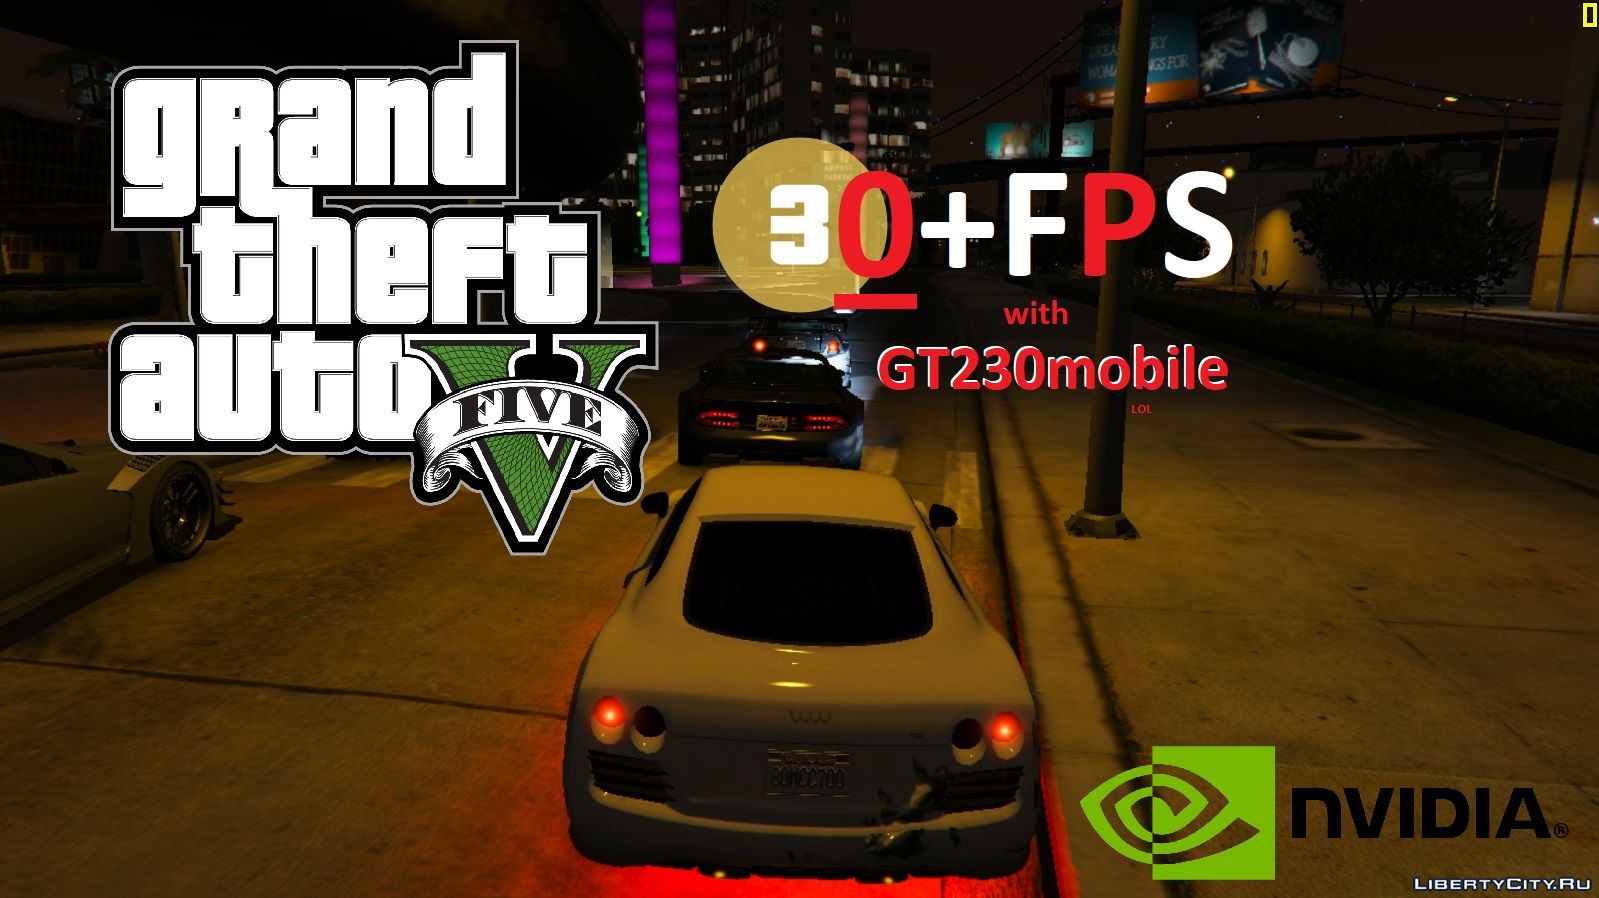 Files to replace Common.cfg in GTA 5 (24 files) / Files have been sorted by  downloads in ascending order